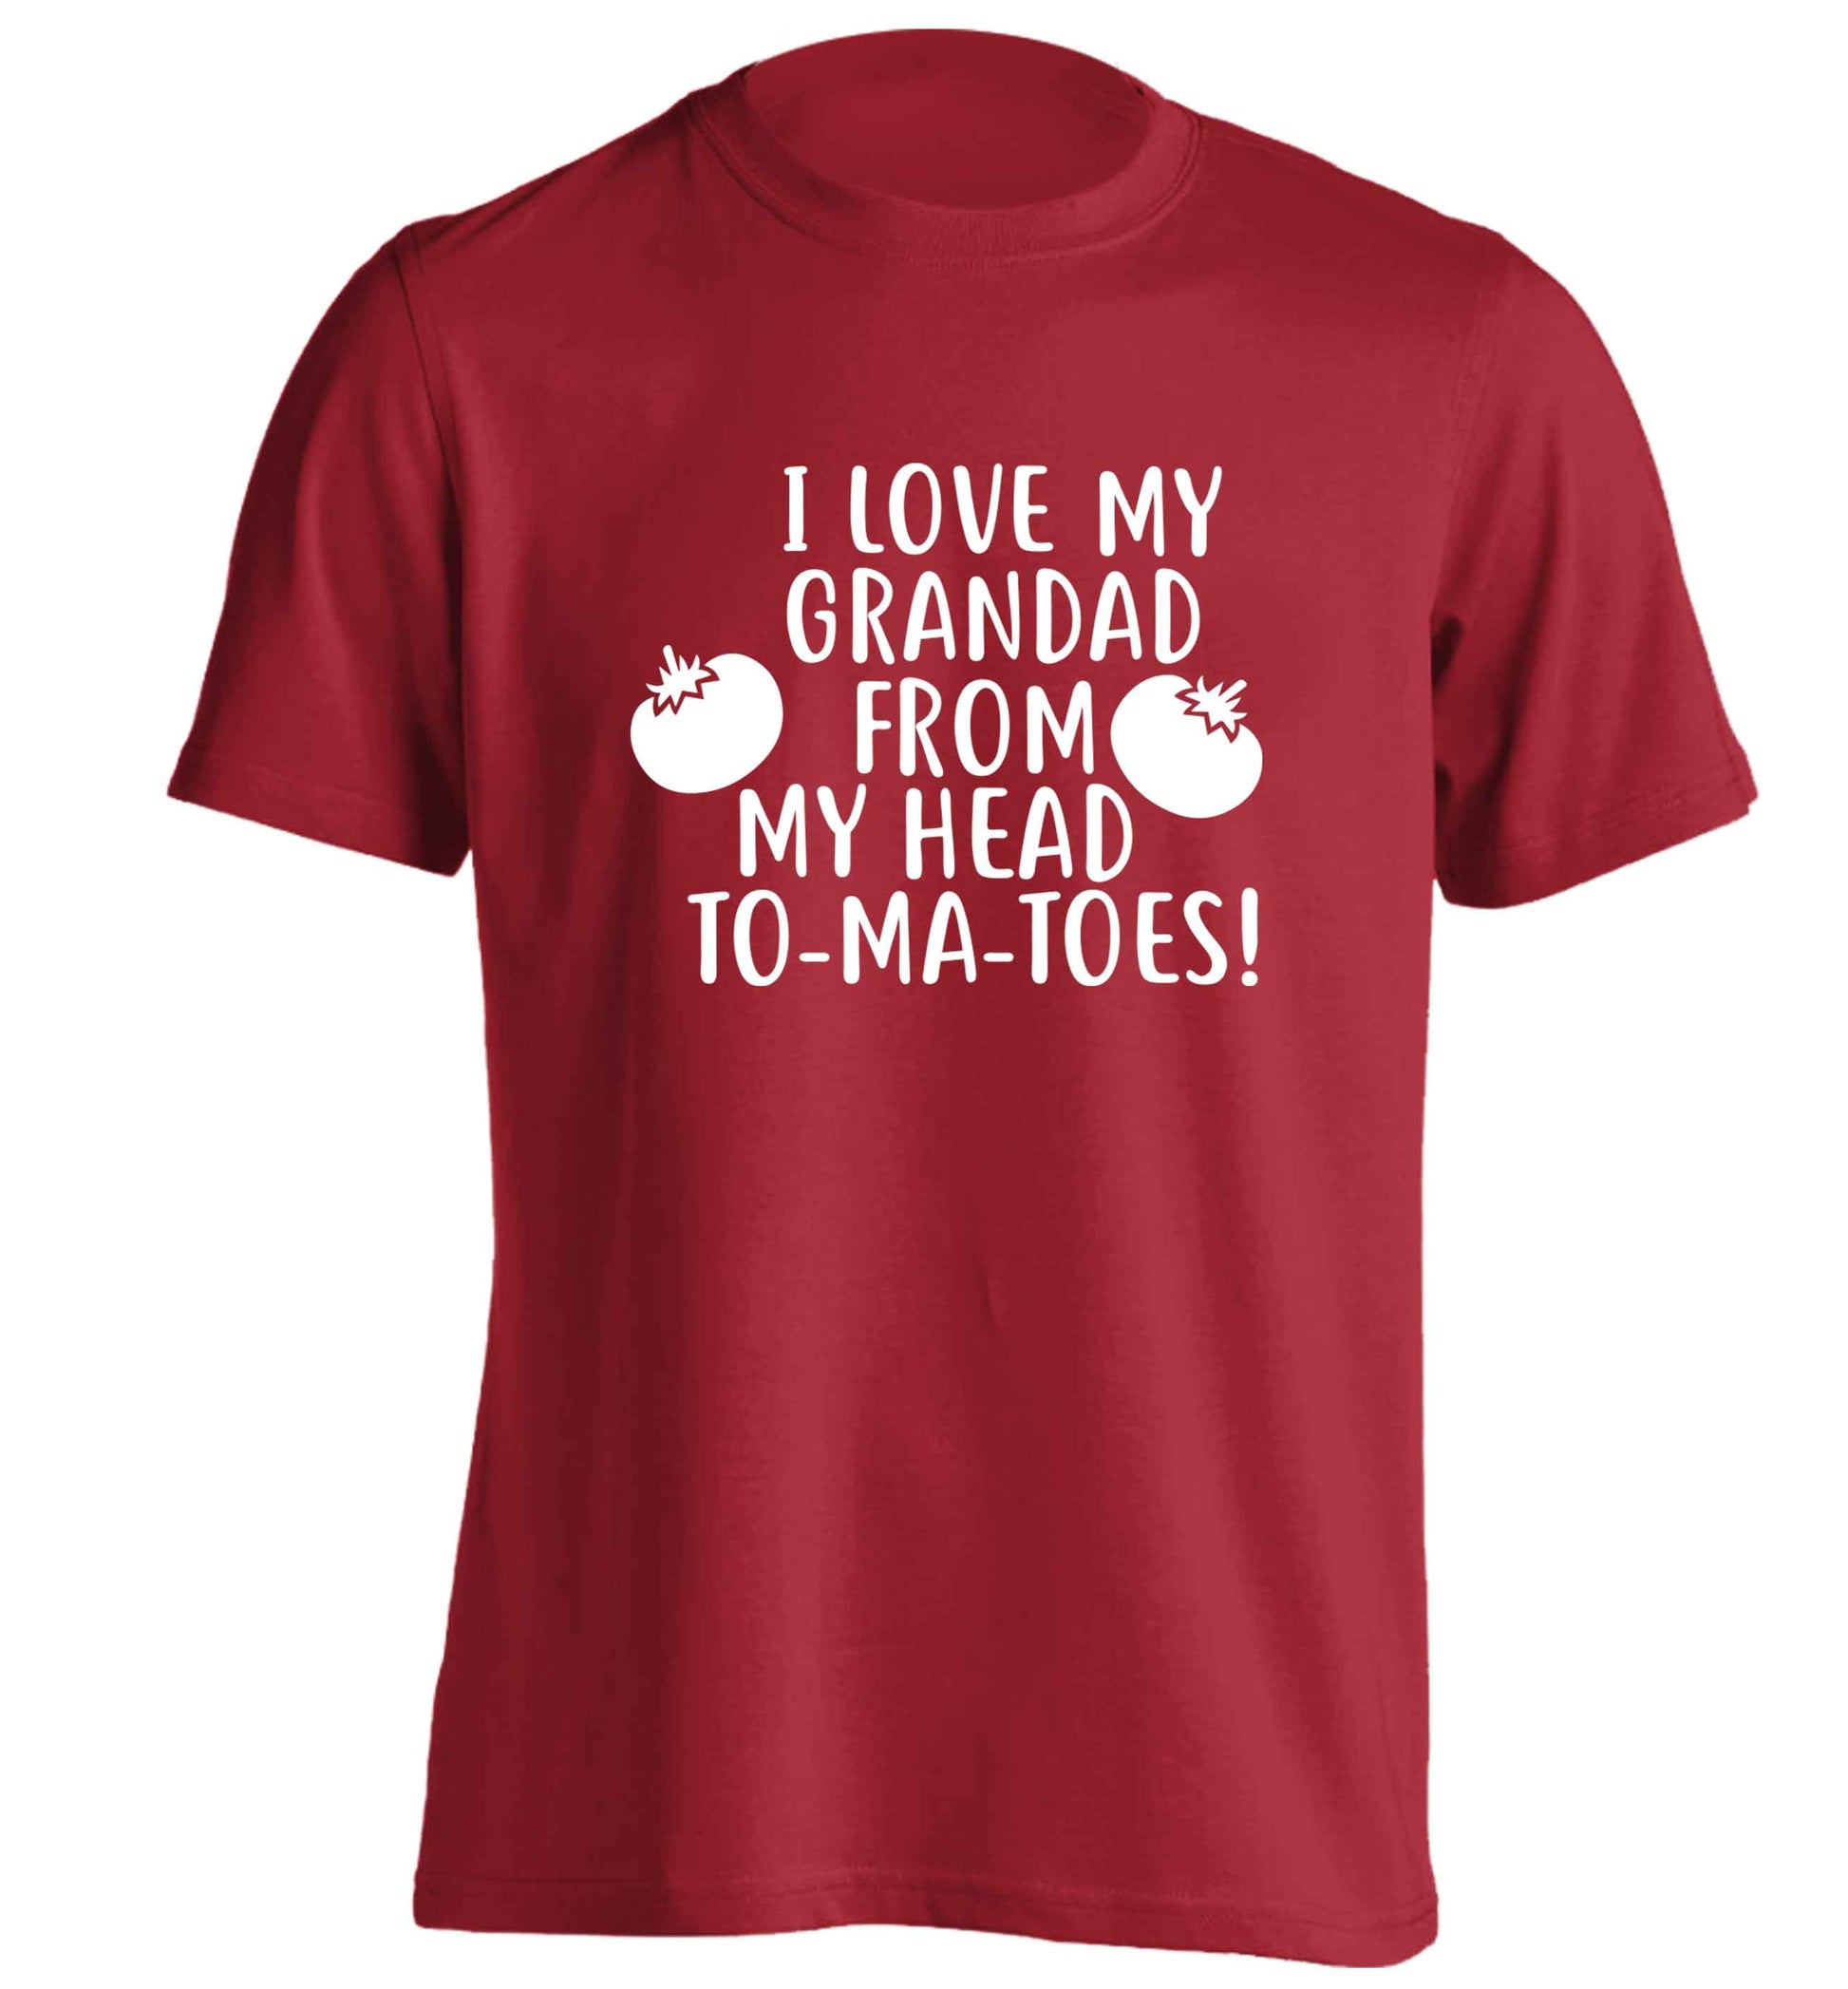 I love my grandad from my head To-Ma-Toes adults unisex red Tshirt 2XL